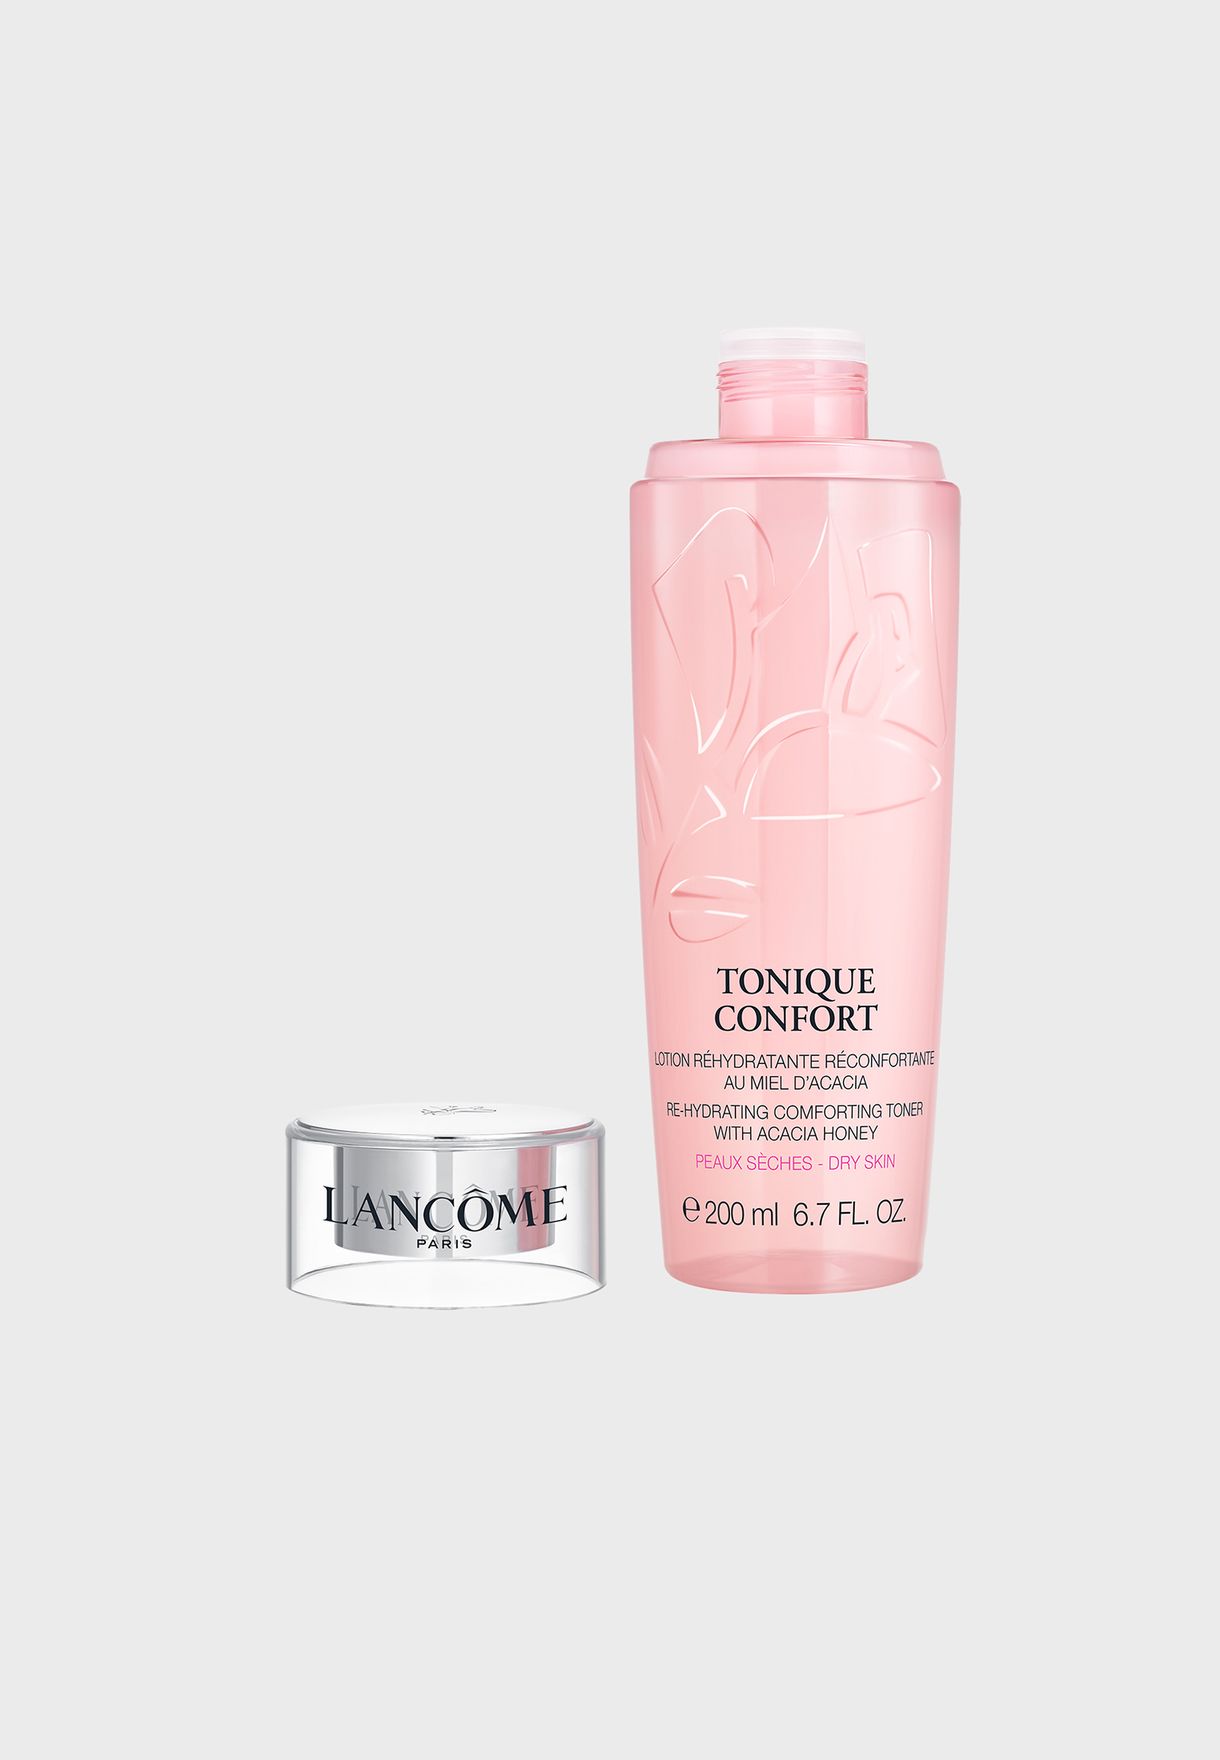 Confort Tonique 200ml Hydrating Toner for Dry Skin